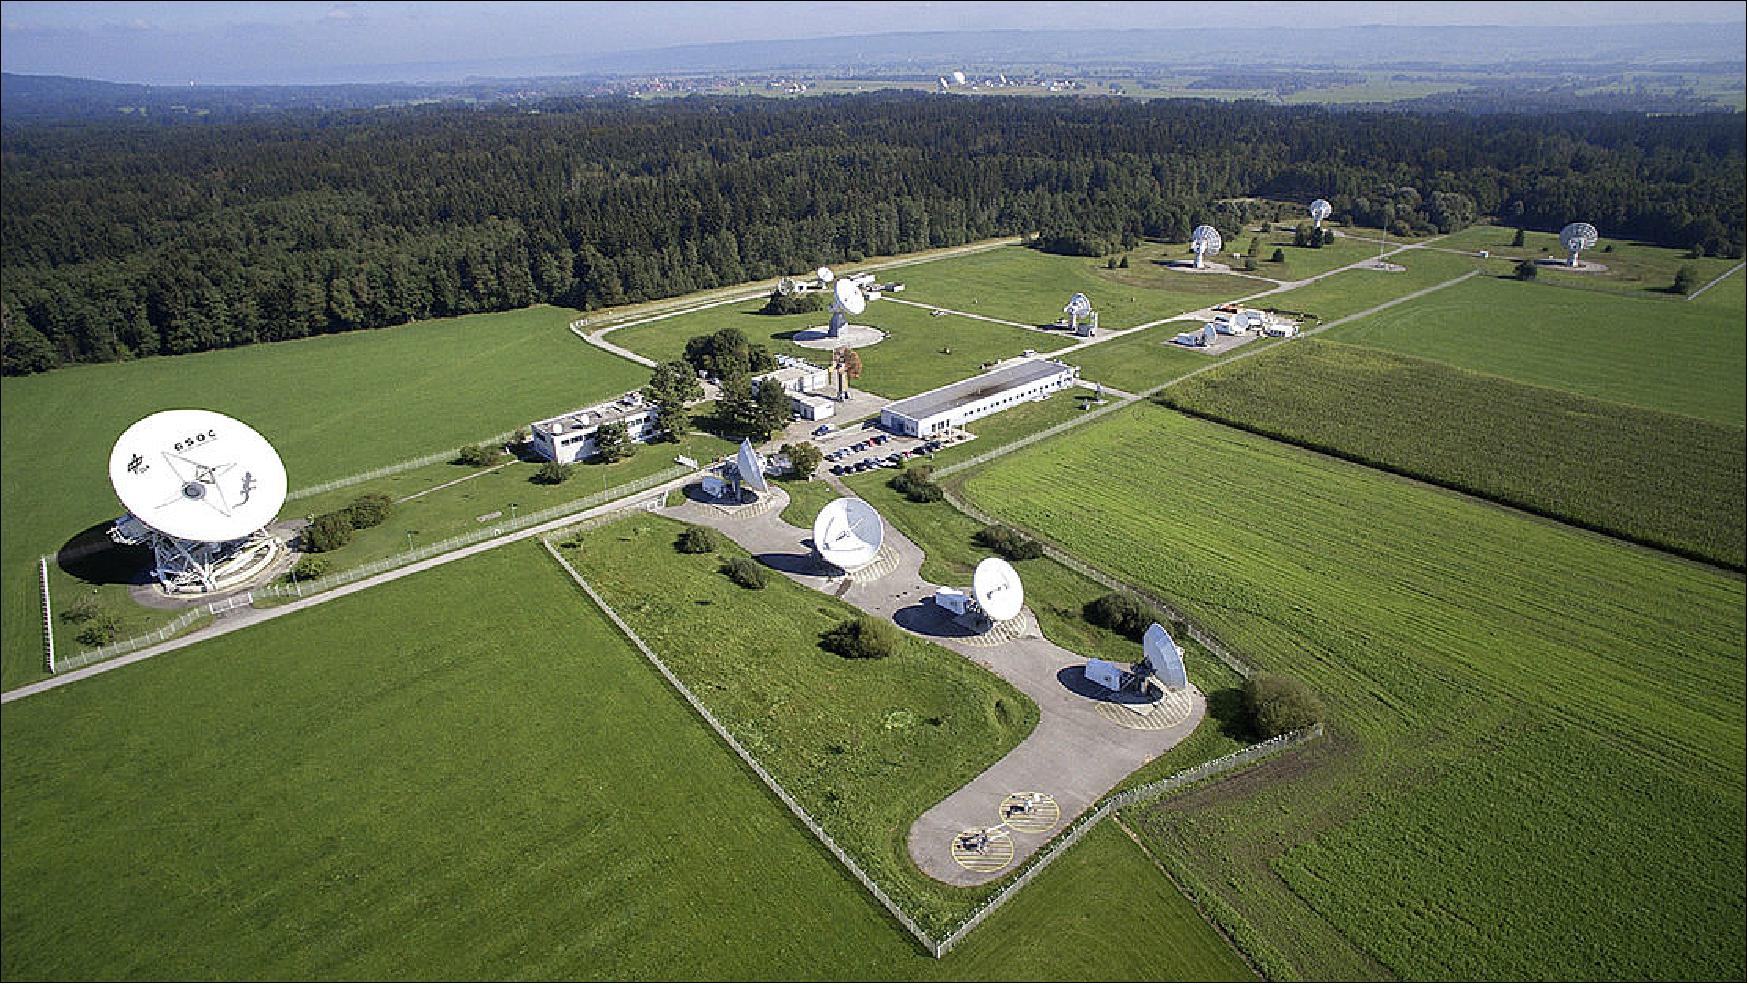 Figure 39: Photo of the DLR/GSOC ground station at the Weilheim site with a 30 m deep-space antenna at left. DLR is operating its ground station around the clock on a seven-day week. The ground station is connected with GSOC in Oberpfaffenhofen via a dedicated redundant communications link. GSOC coordinates the operation of all antennas and provides all TTC services and data processing for its satellite missions, including of leasing services to external customers (image credit: DLR/GSOC)